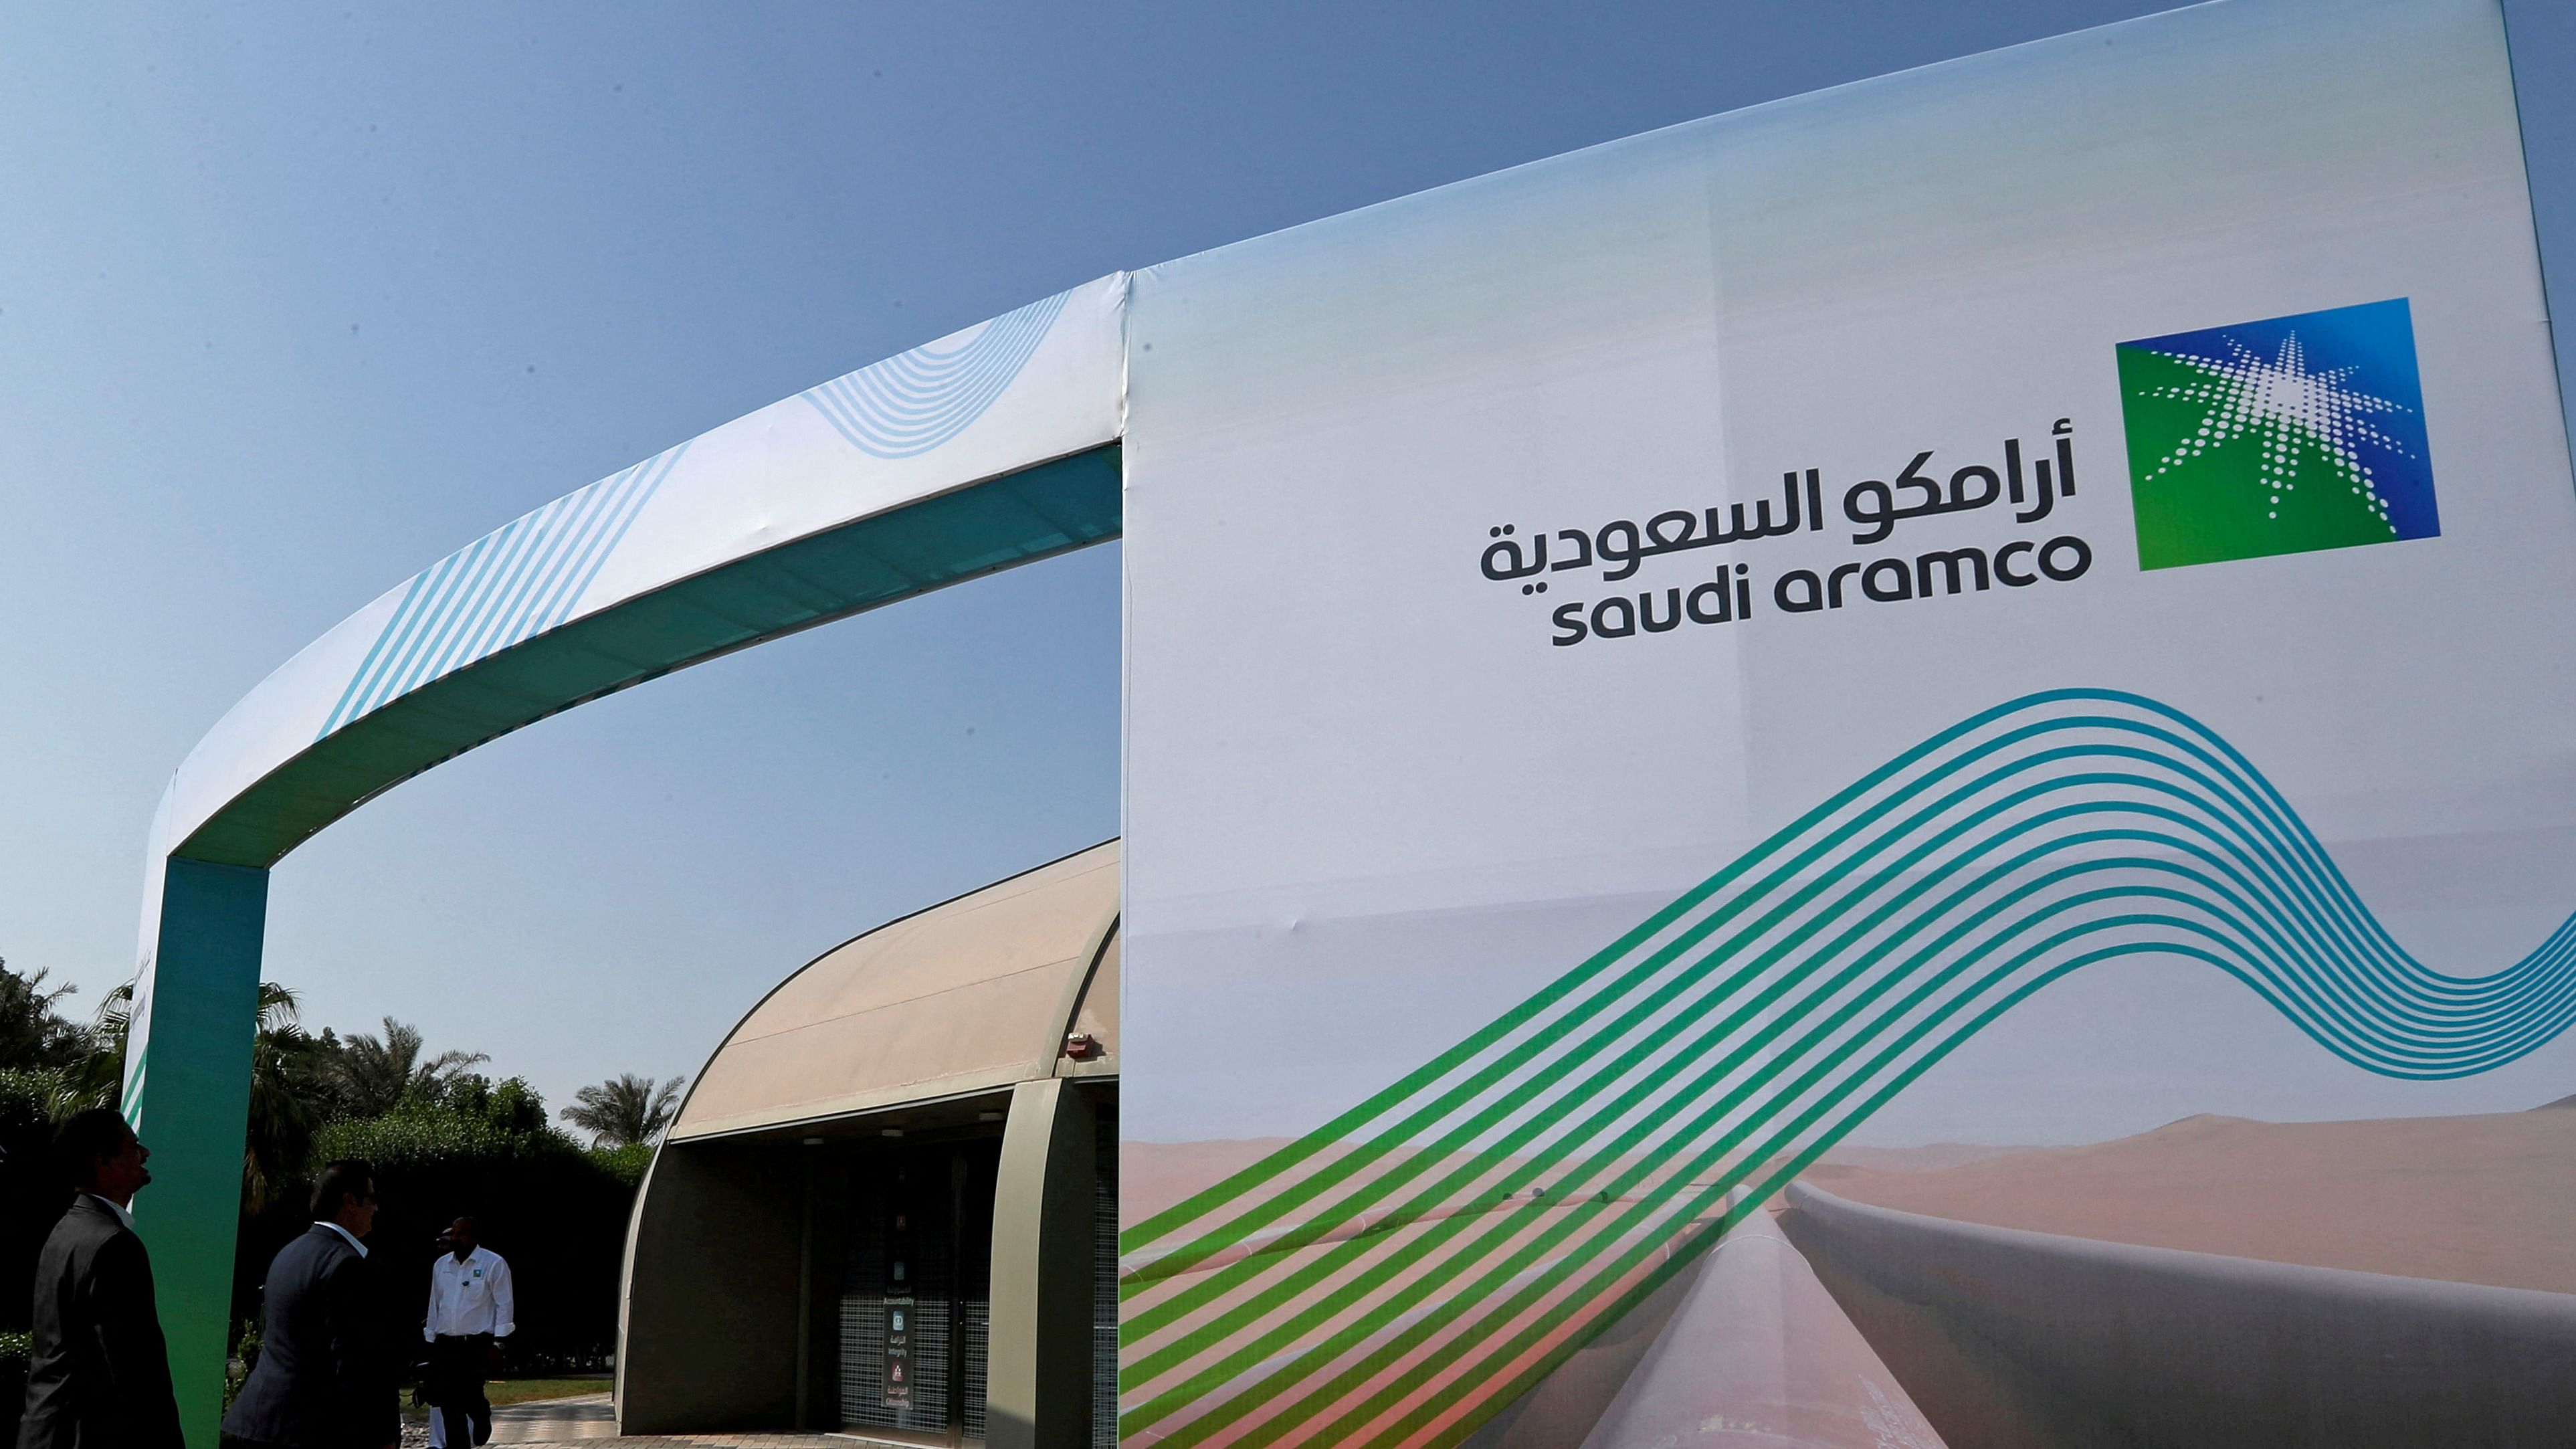 Saudi Aramco, one of the world's richest companies, will sponsor the International Cricket Council's upcoming men's and women's T20 World Cups. Credit: Reuters Photo